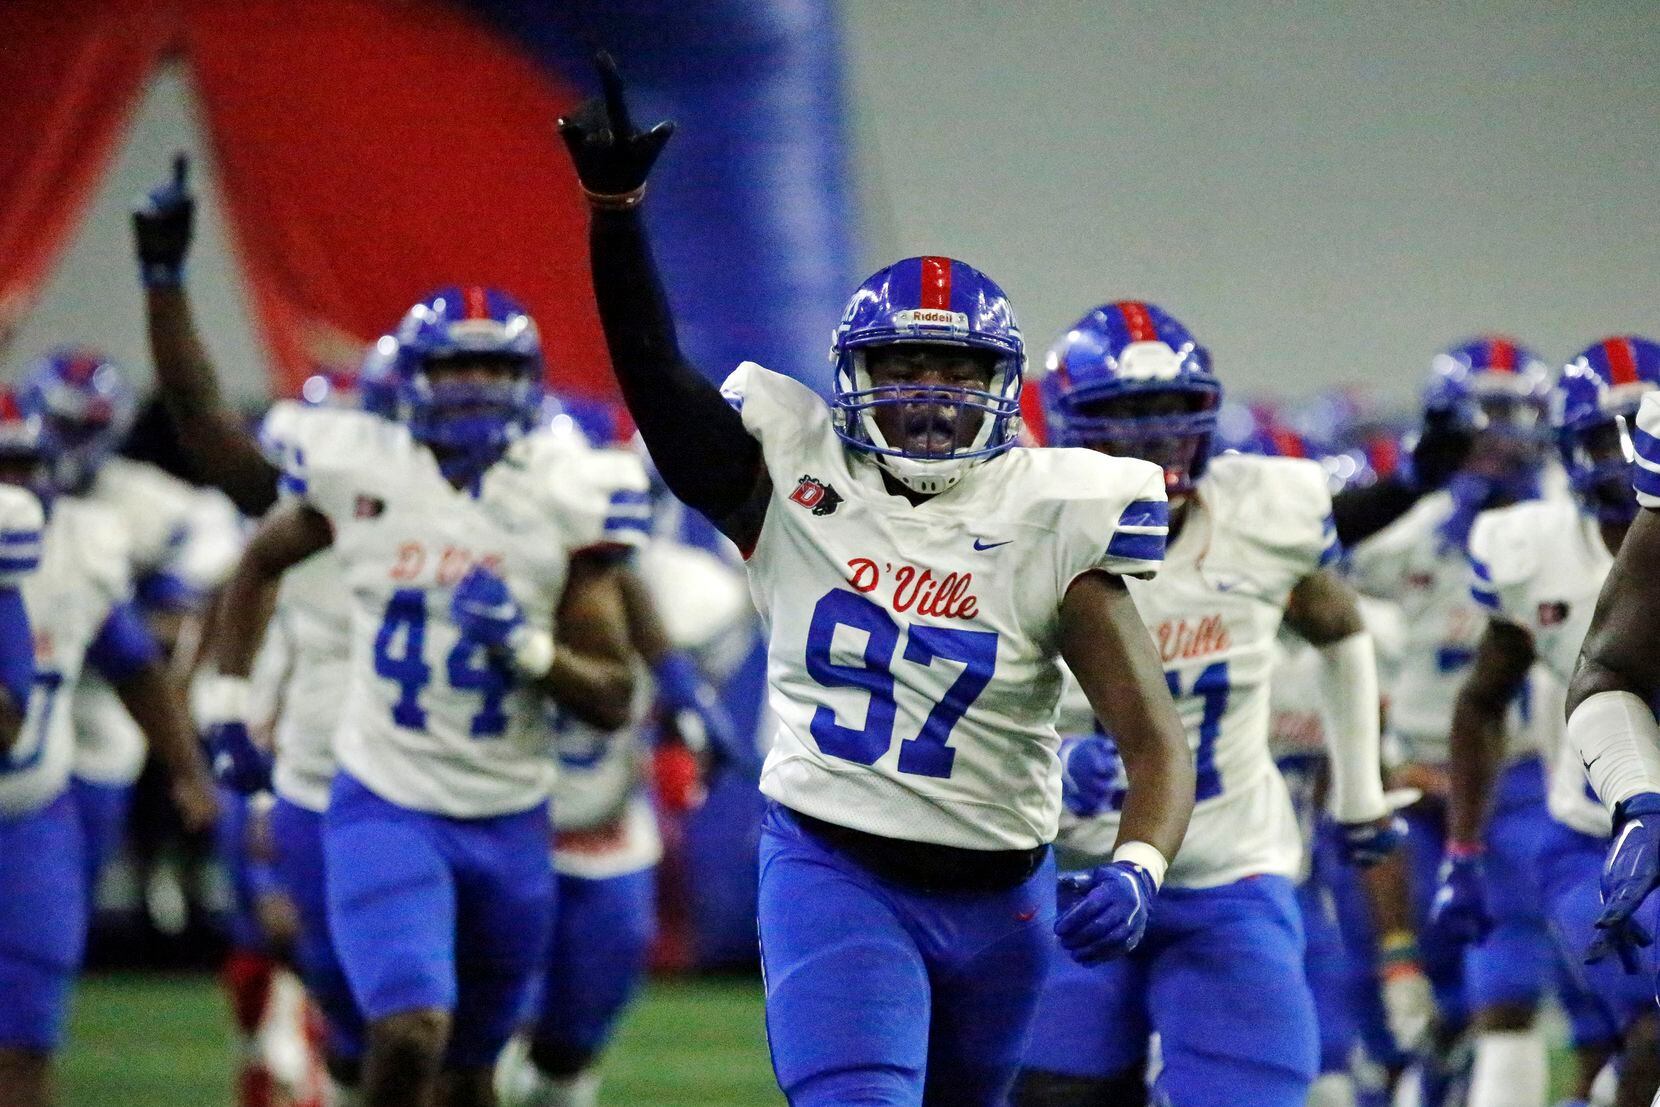 Duncanville High School defensive lineman Dil’Anthony Cole (97) runs onto the field with his team before kickoff as DeSoto High School played Duncanville High School in the Class 6A Division I Region II final playoff game at the Ford Center in Frisco on Saturday, December 4, 2021. (Stewart F. House/Special Contributor)